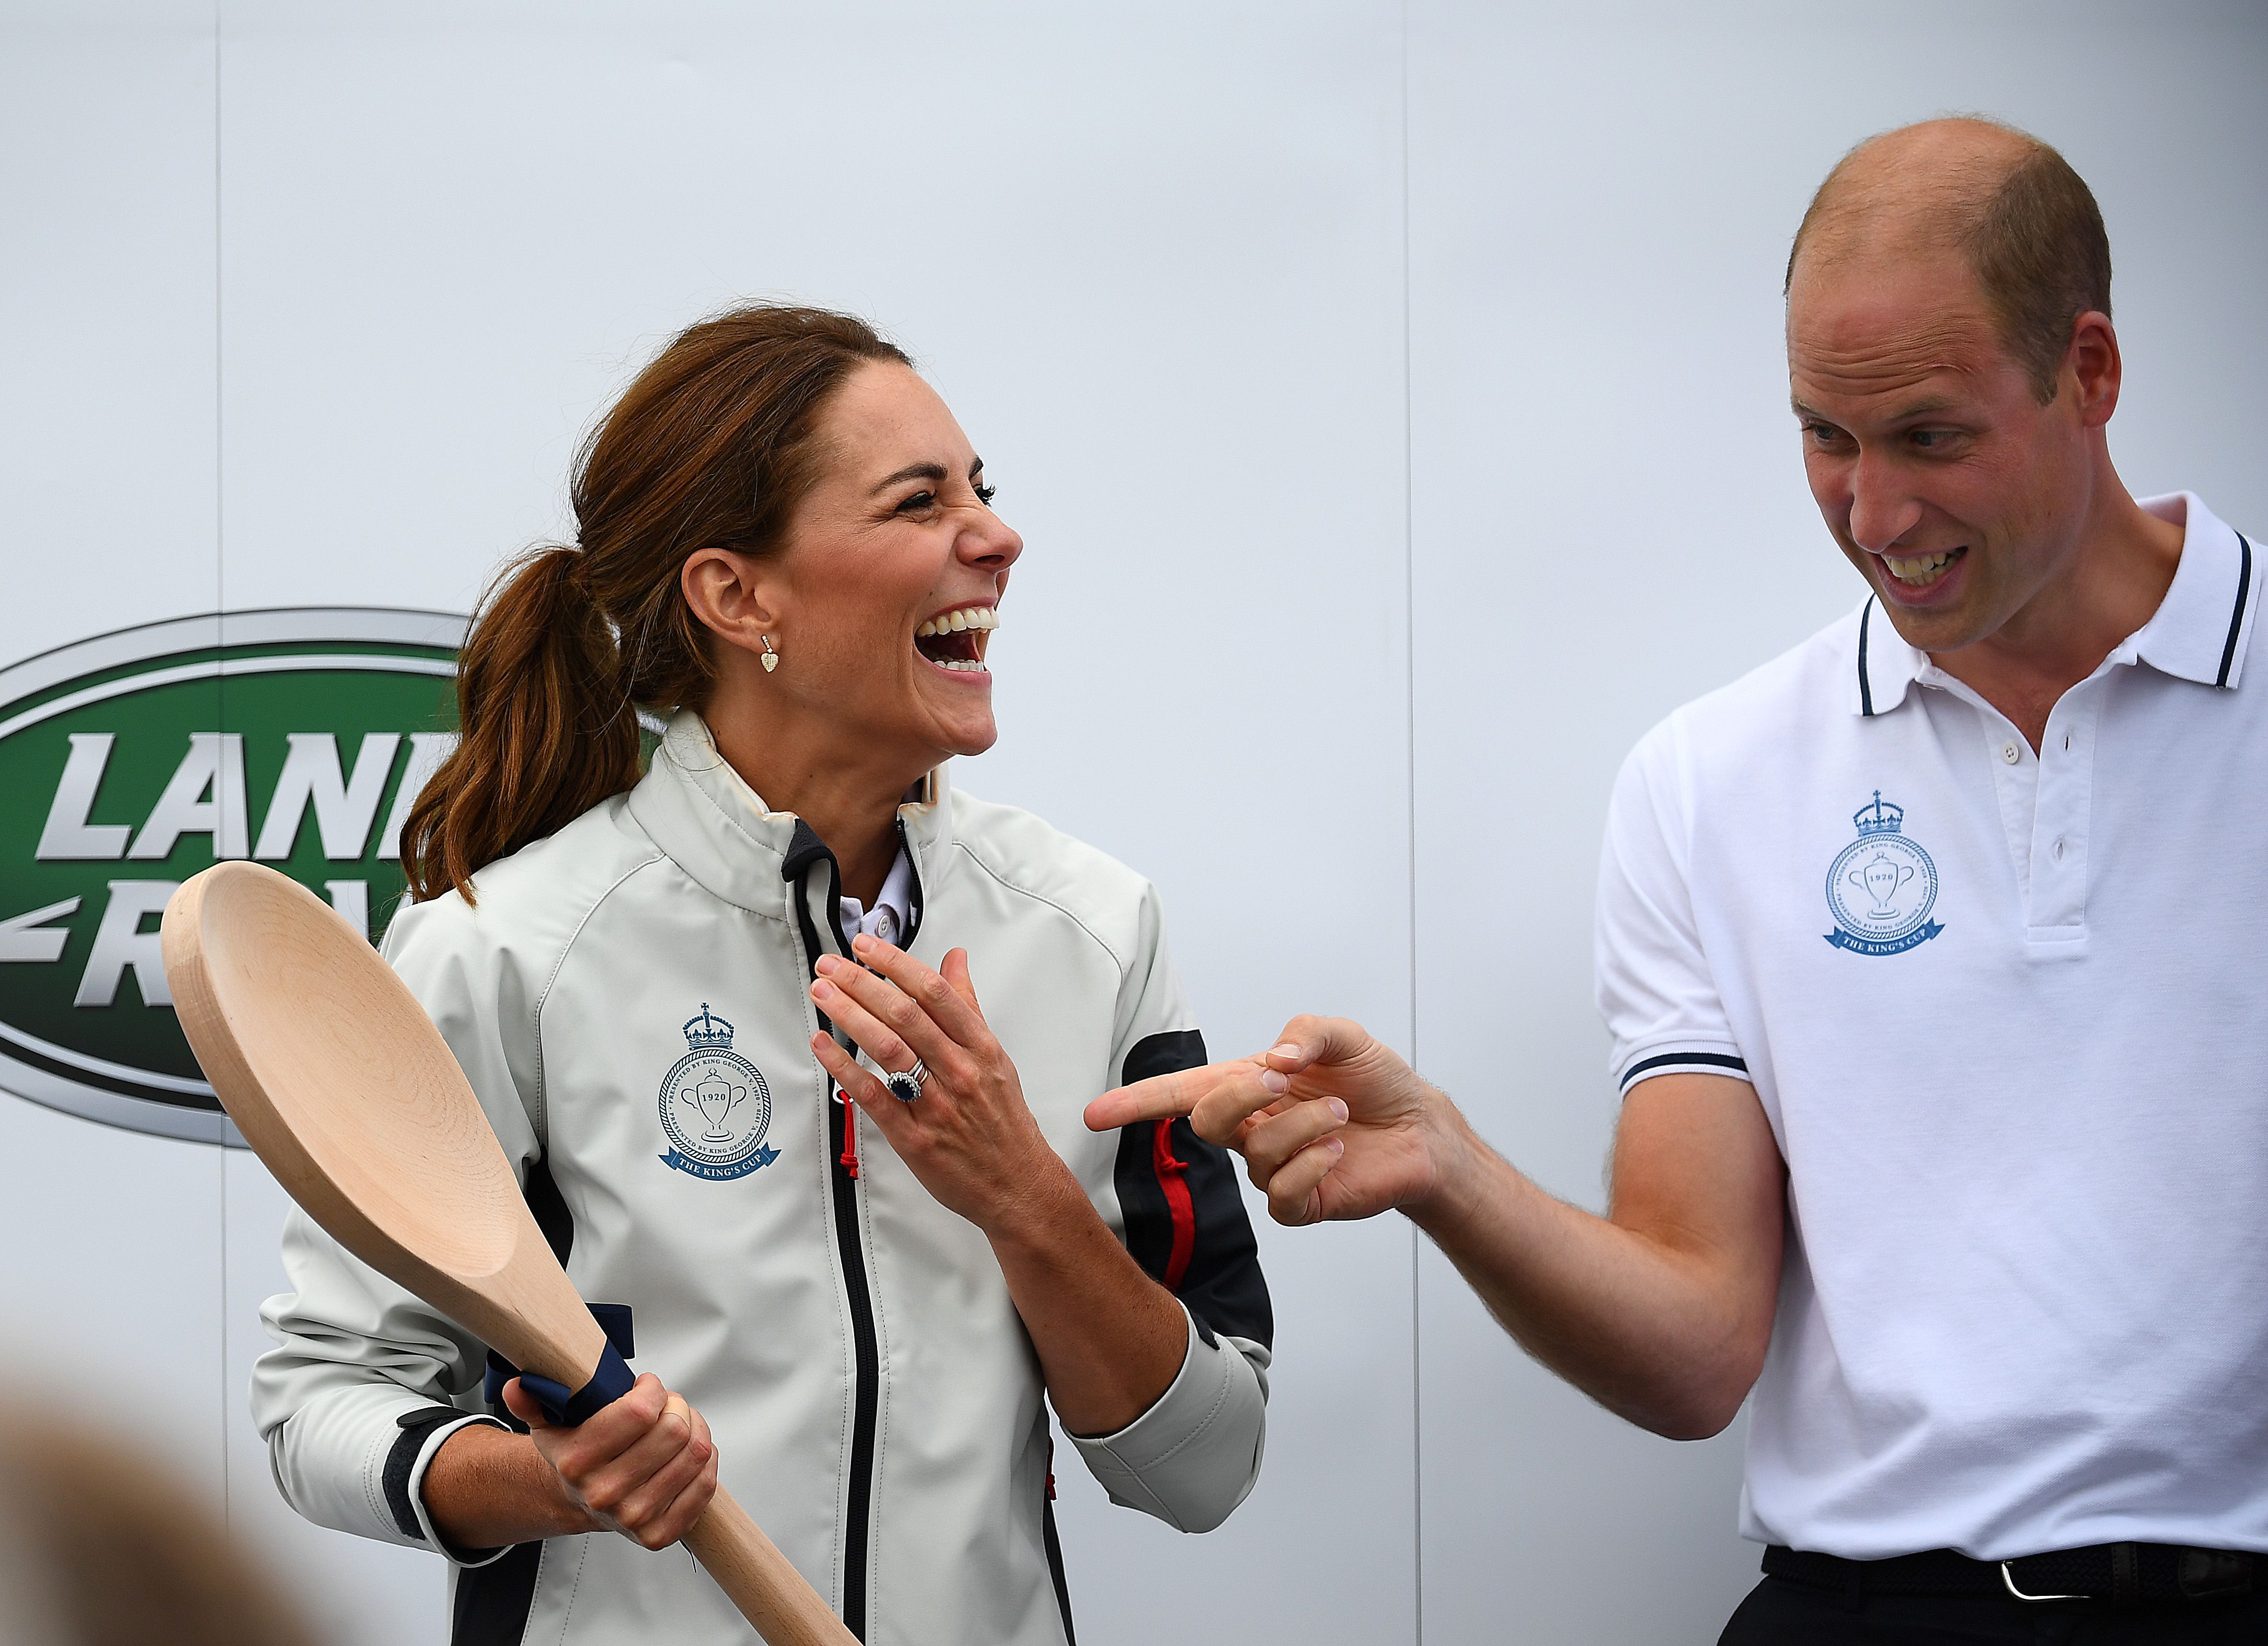 Prince William Makes Fun of Kate Middleton When She Comes Last in Boat